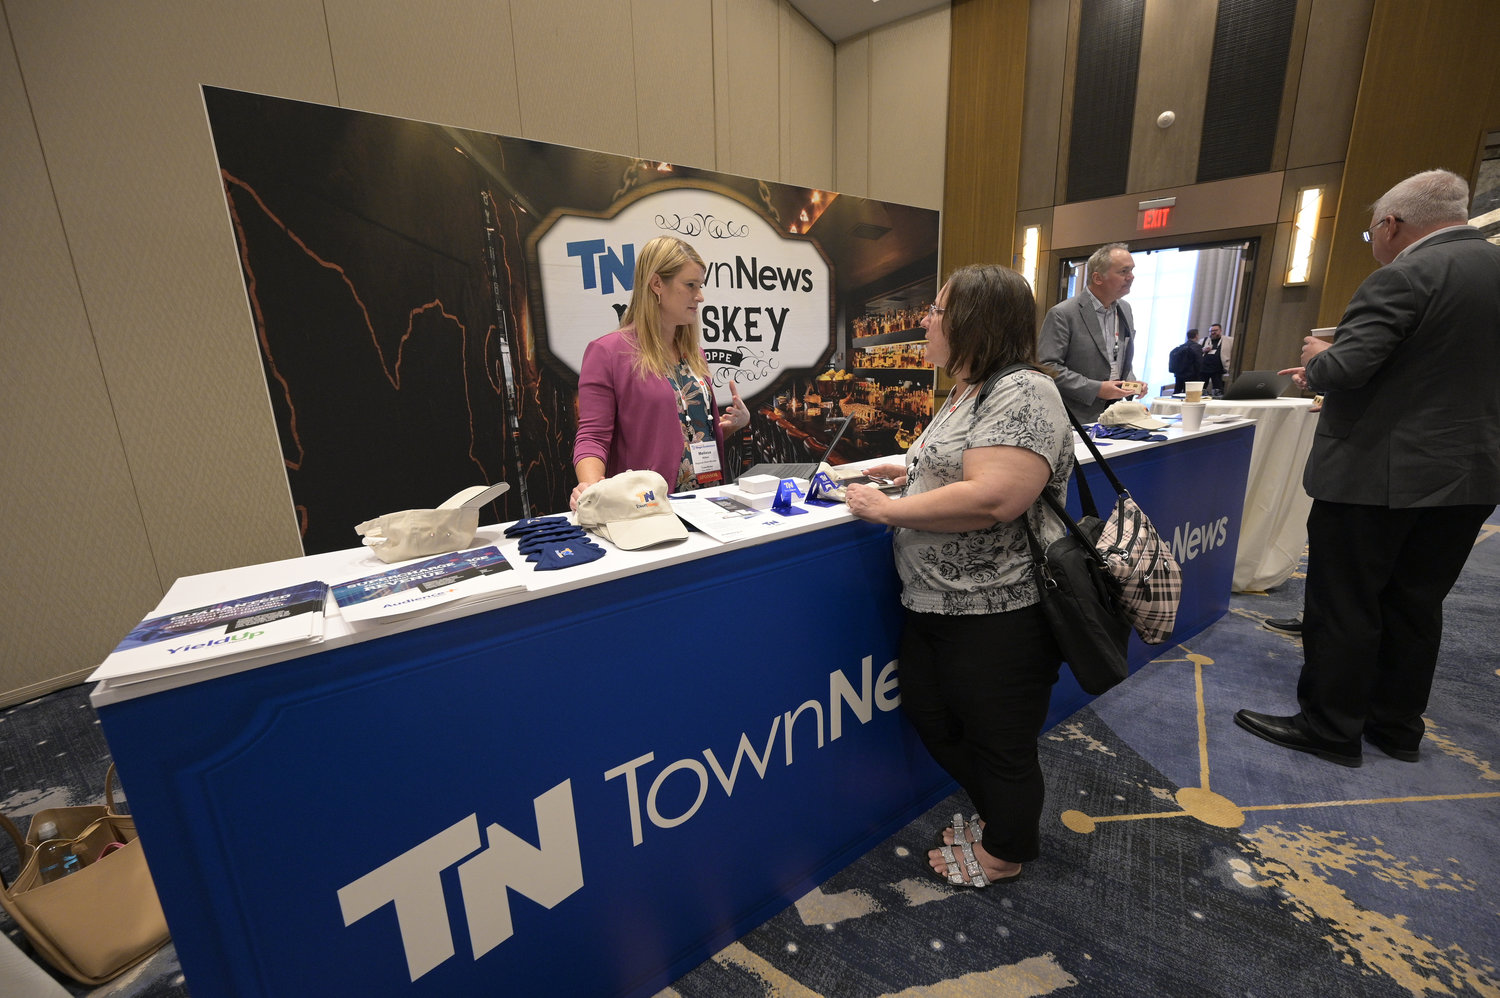 A whiskey bar was hosted during receptions by TownNews -- a premium Mega-Conference sponsorship. (Photo by Phelan M. Ebenhack)